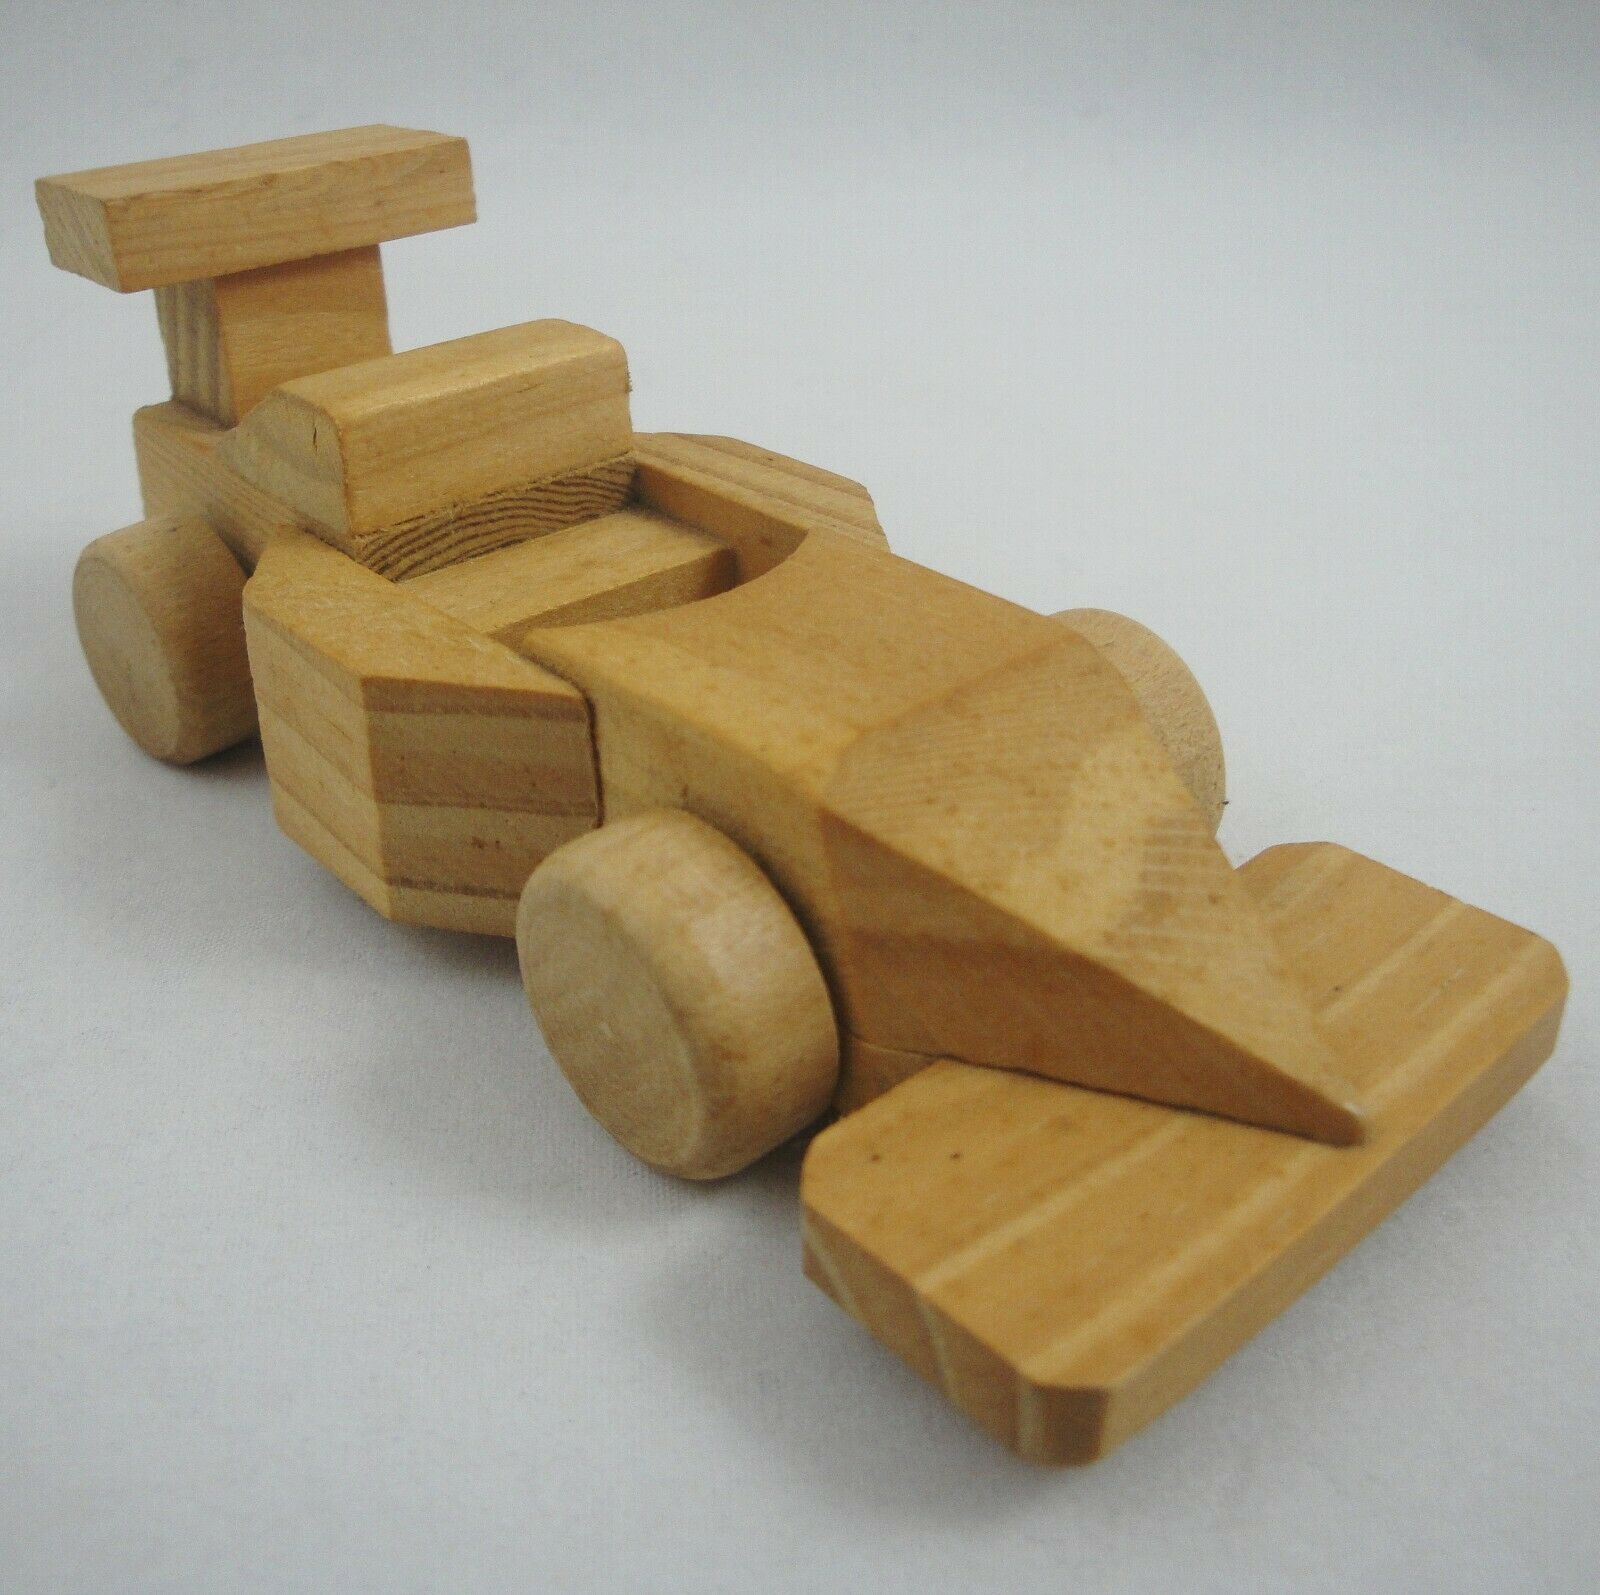 Primary image for Indy Formula 1 One Race Car Racing Toy Natural Wood Unfinished Unpainted 4" long